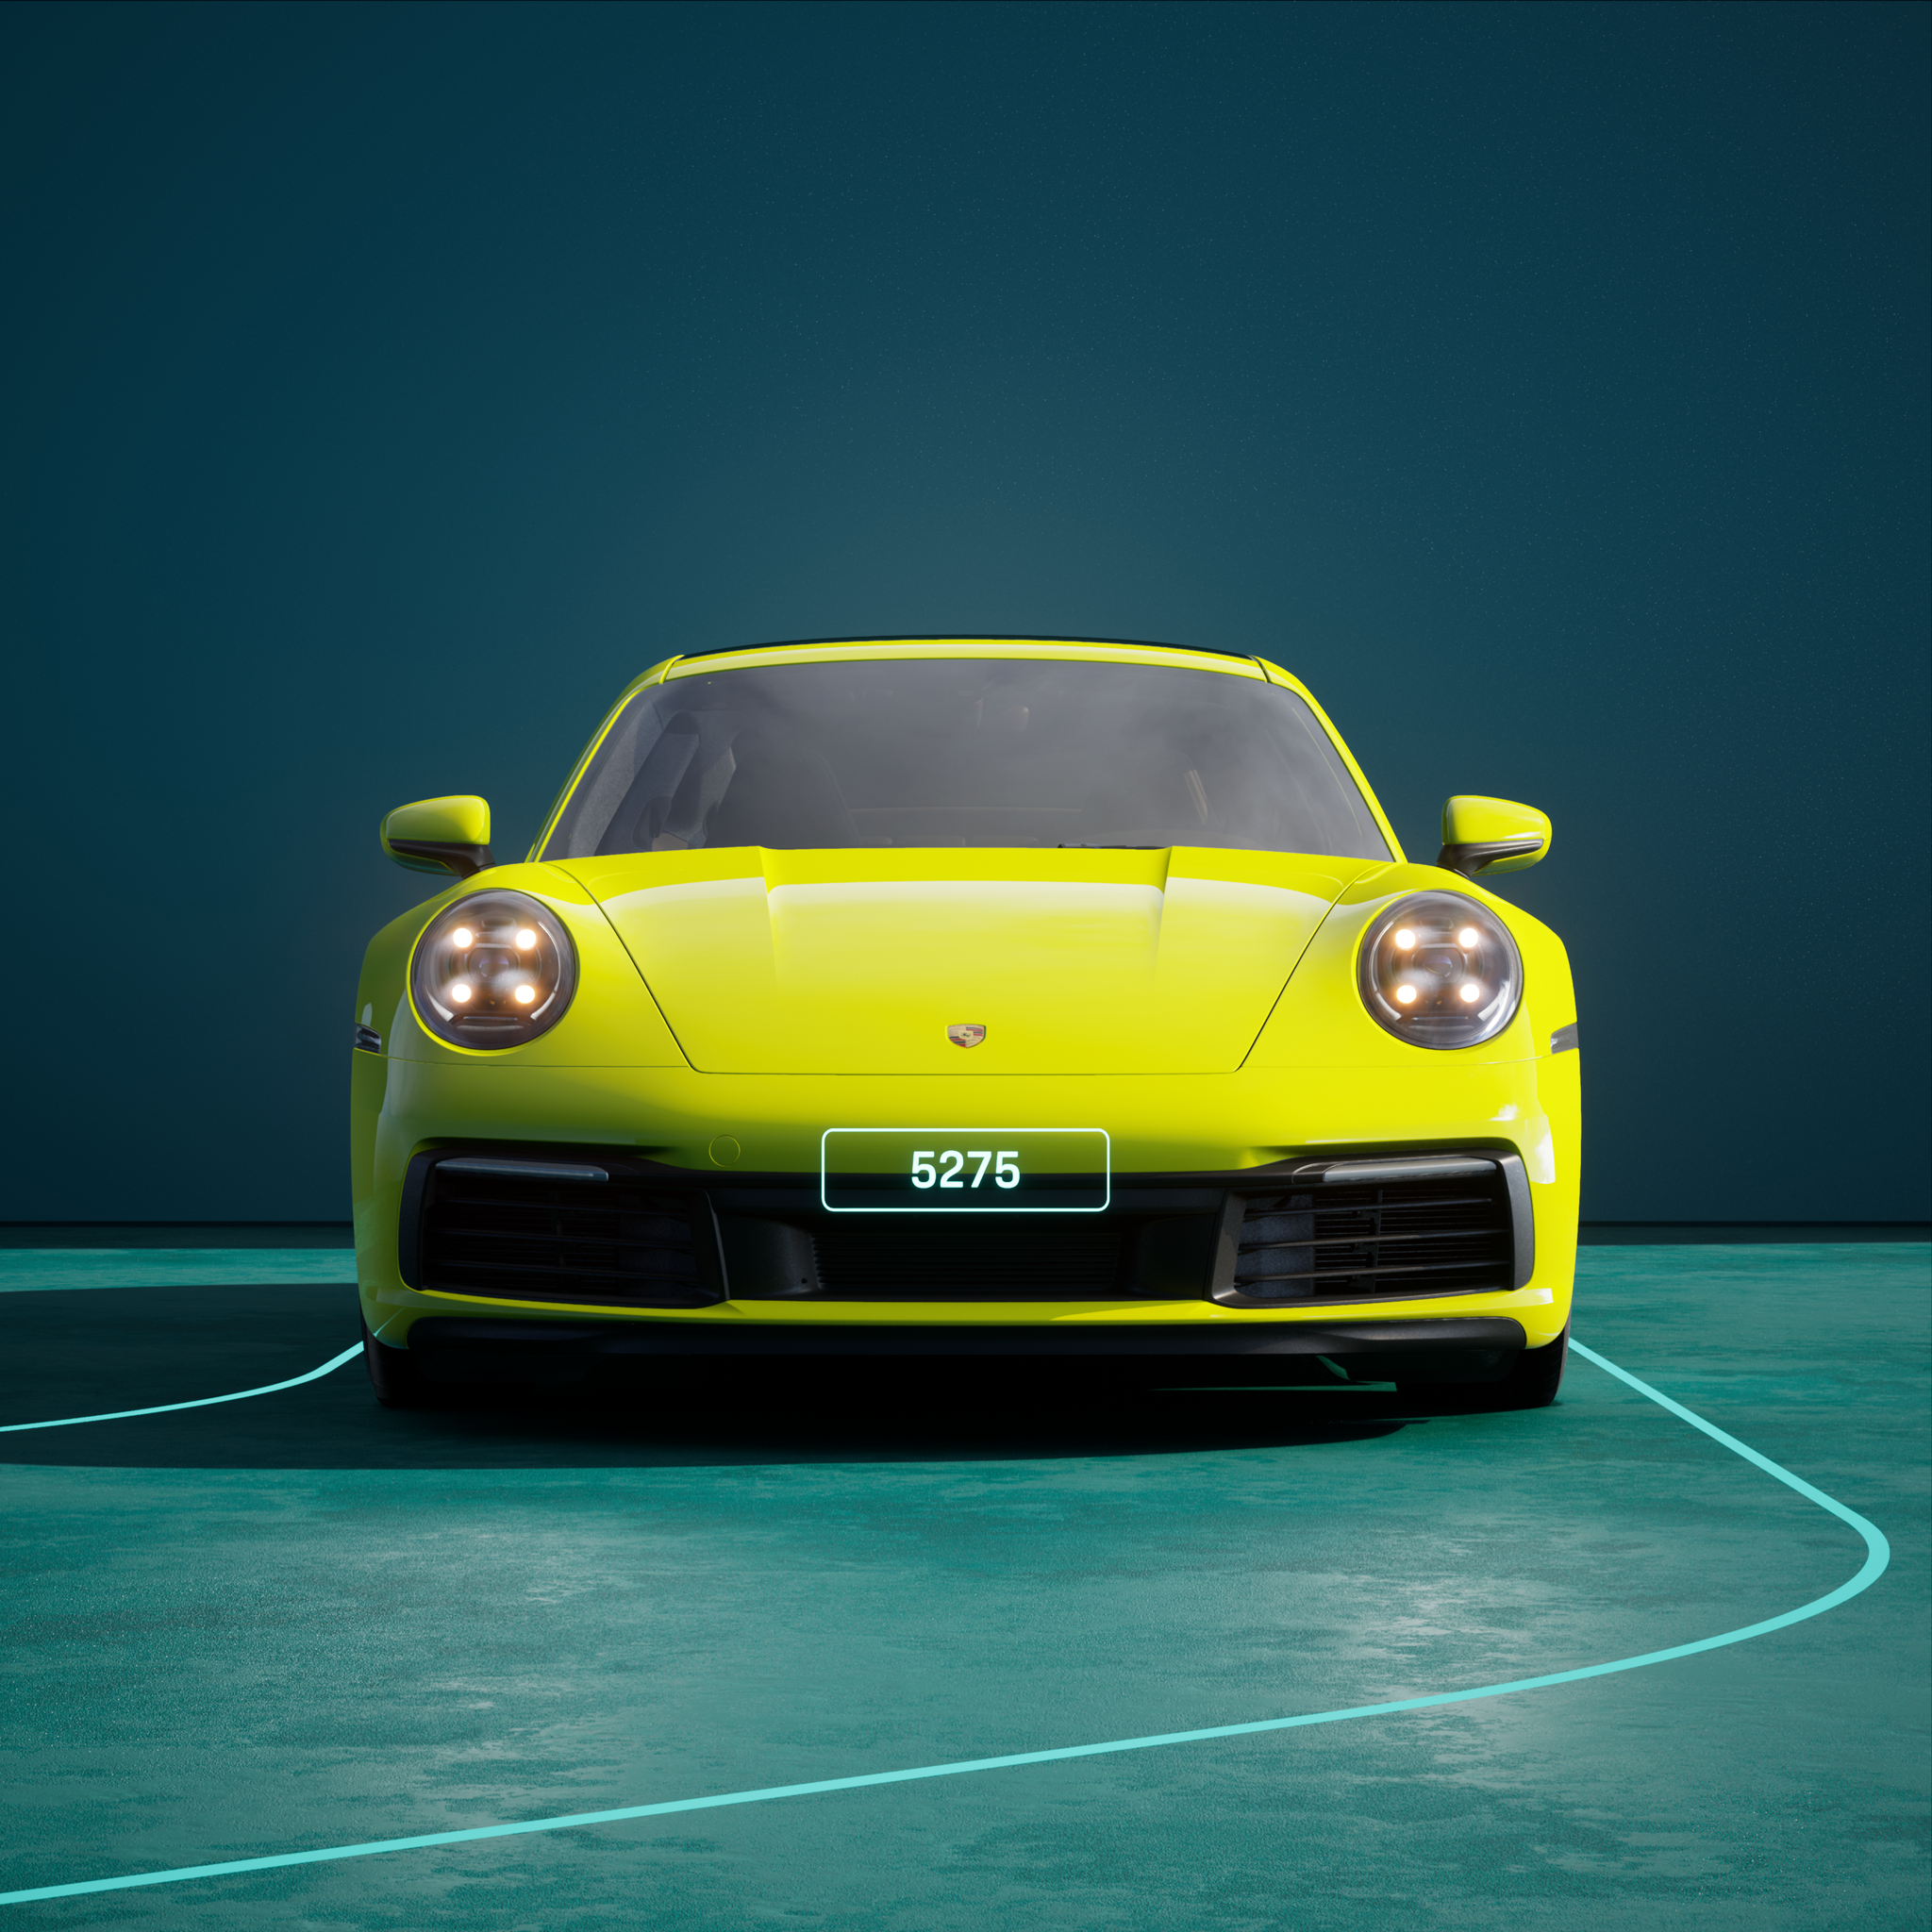 The PORSCHΞ 911 5275 image in phase